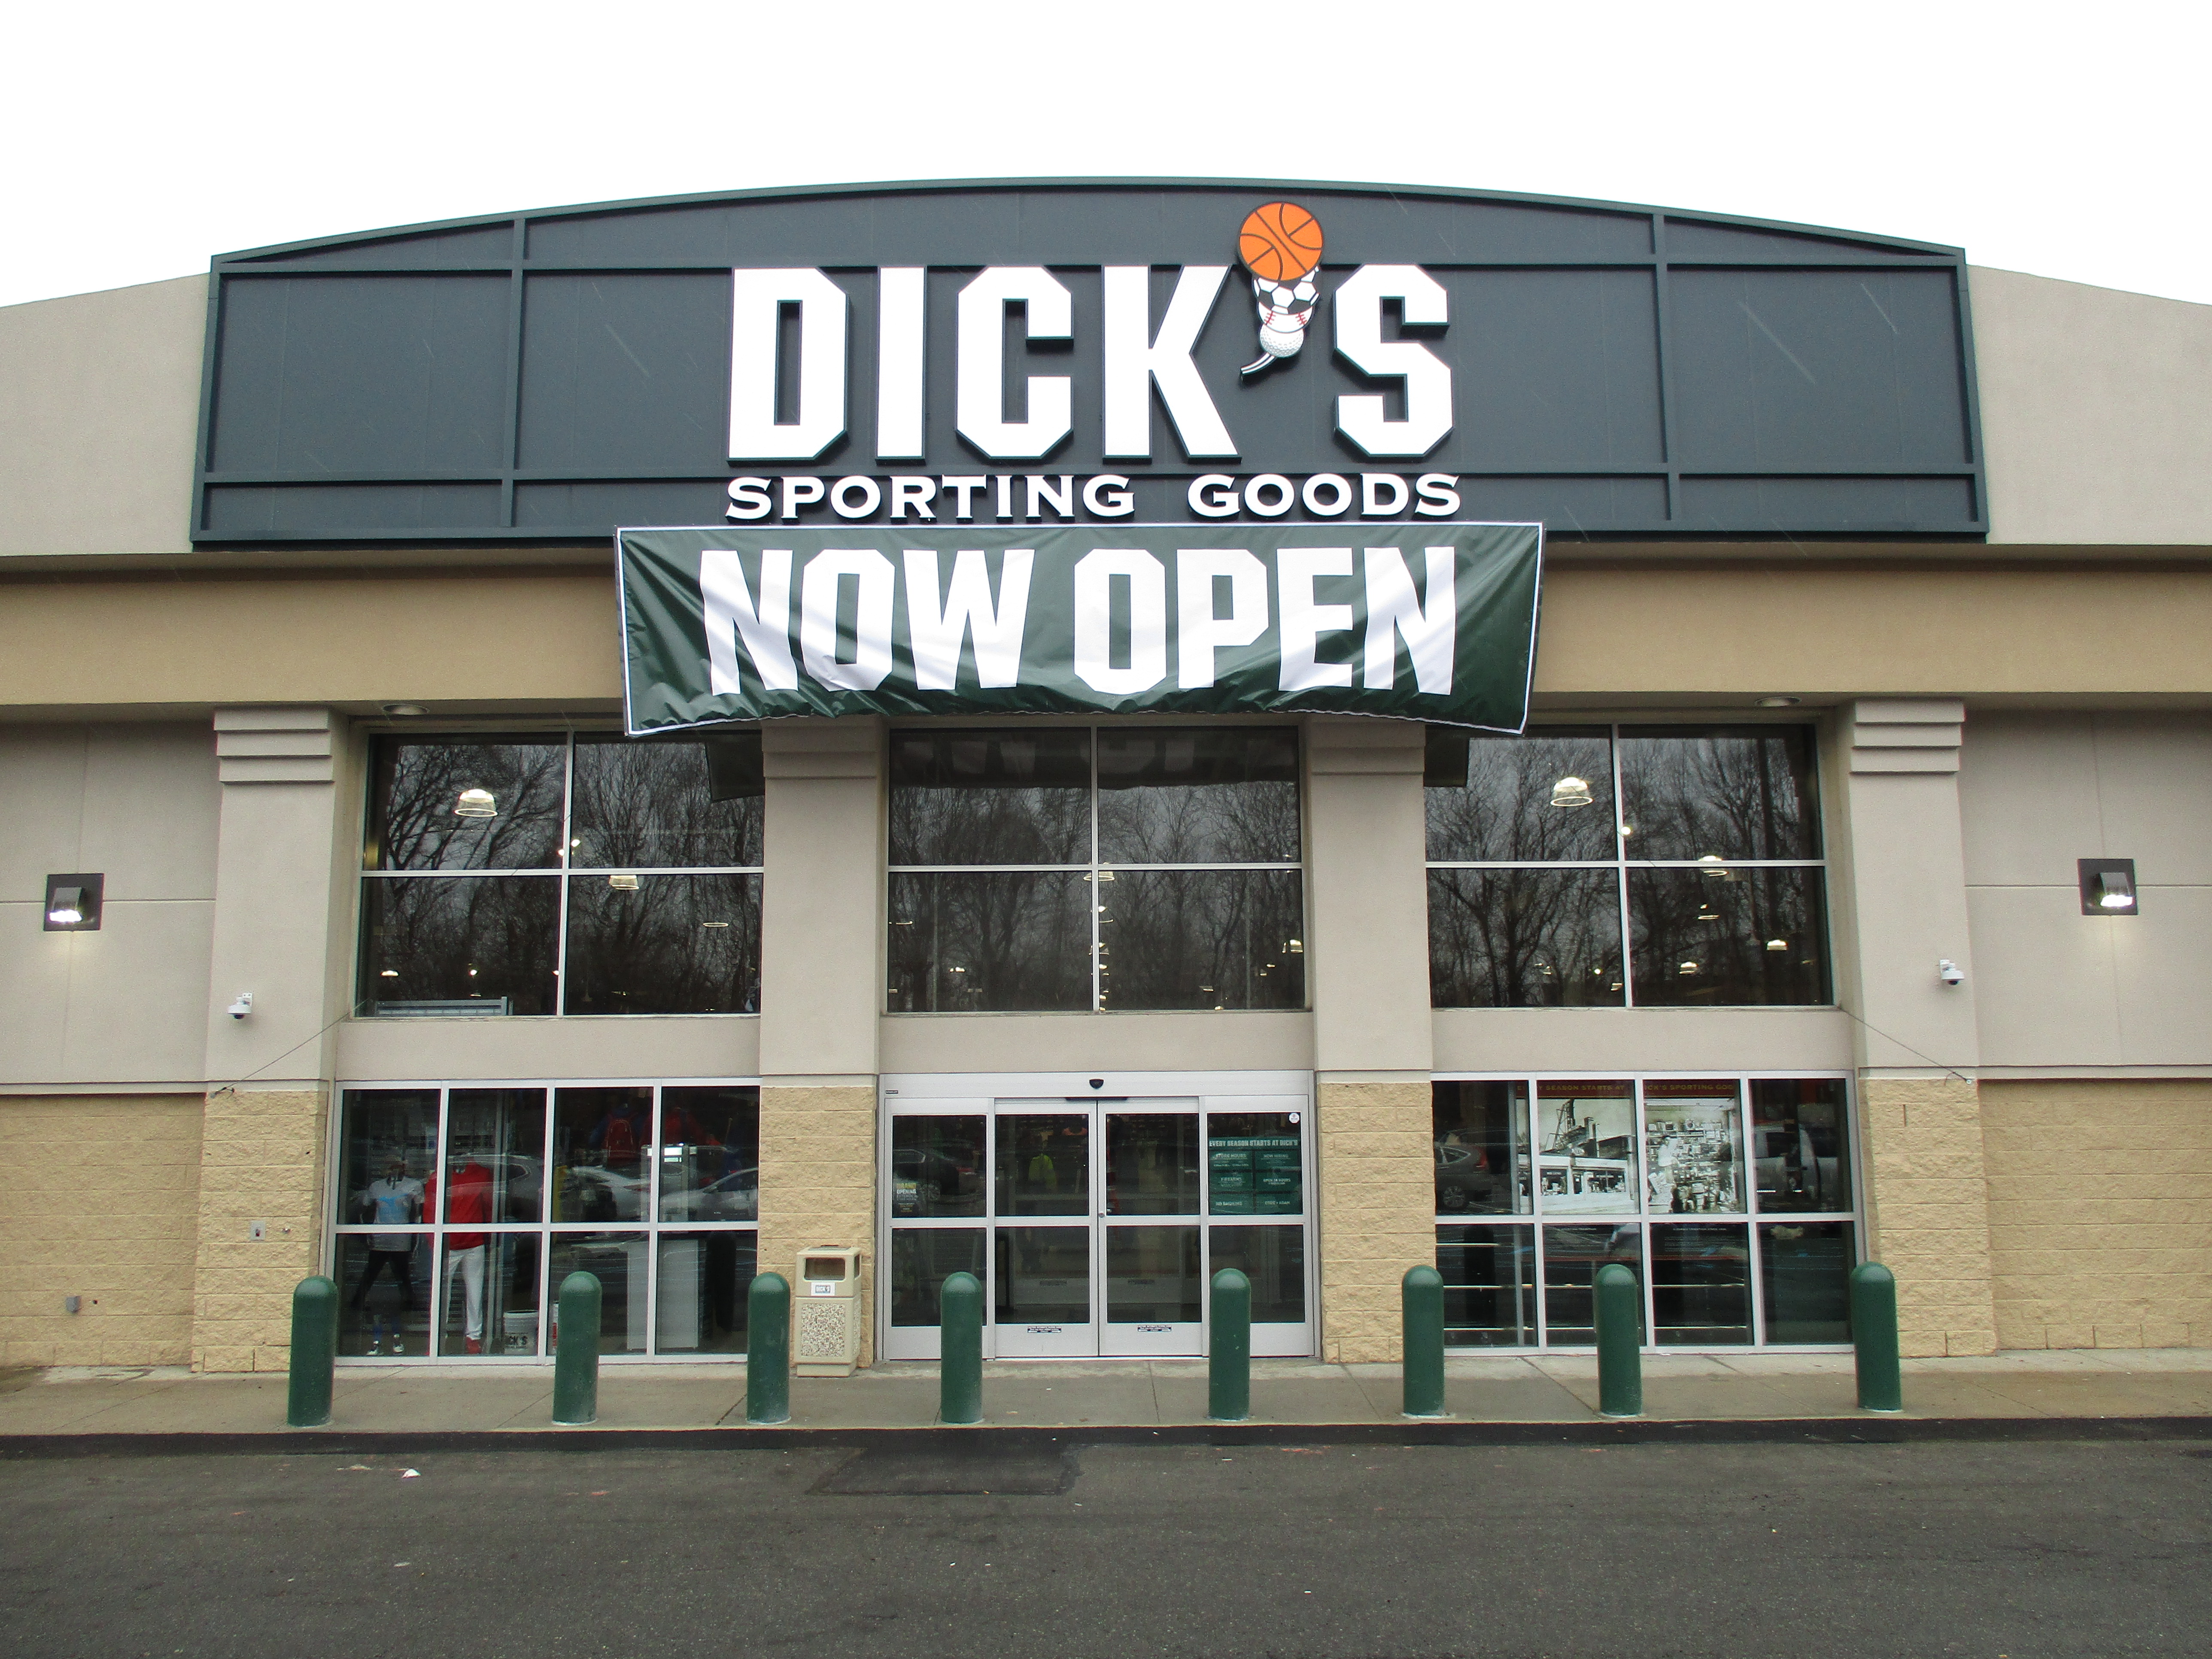 Store front of DICK'S Sporting Goods store in Glendale, NY